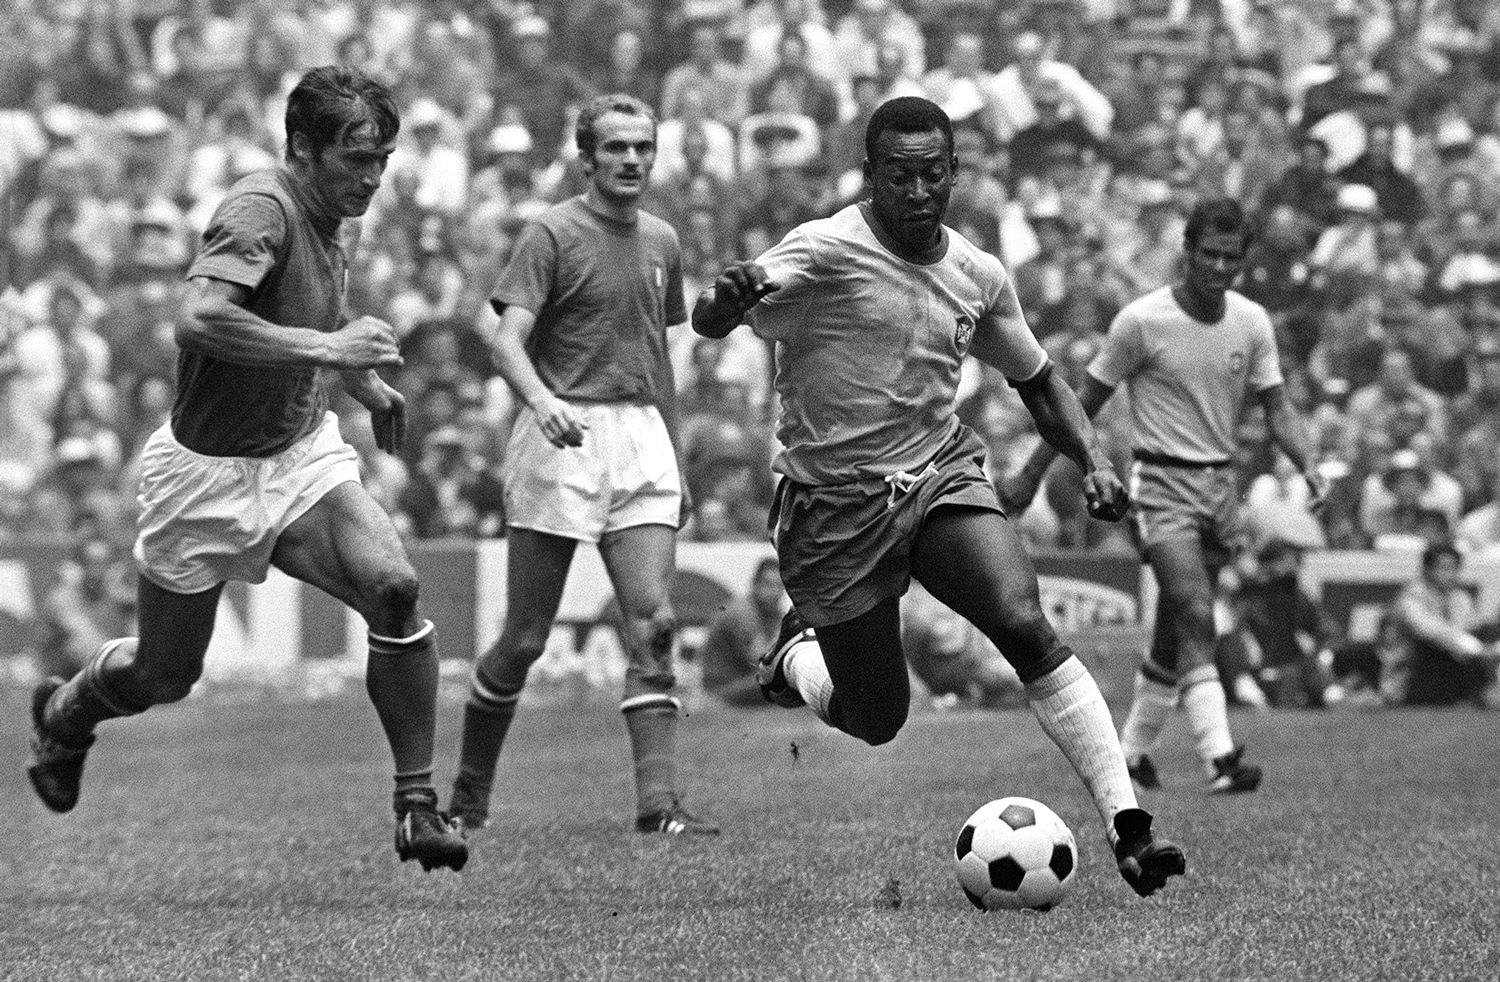 A man on a soccer field with three other players behind him is about to kick a ball